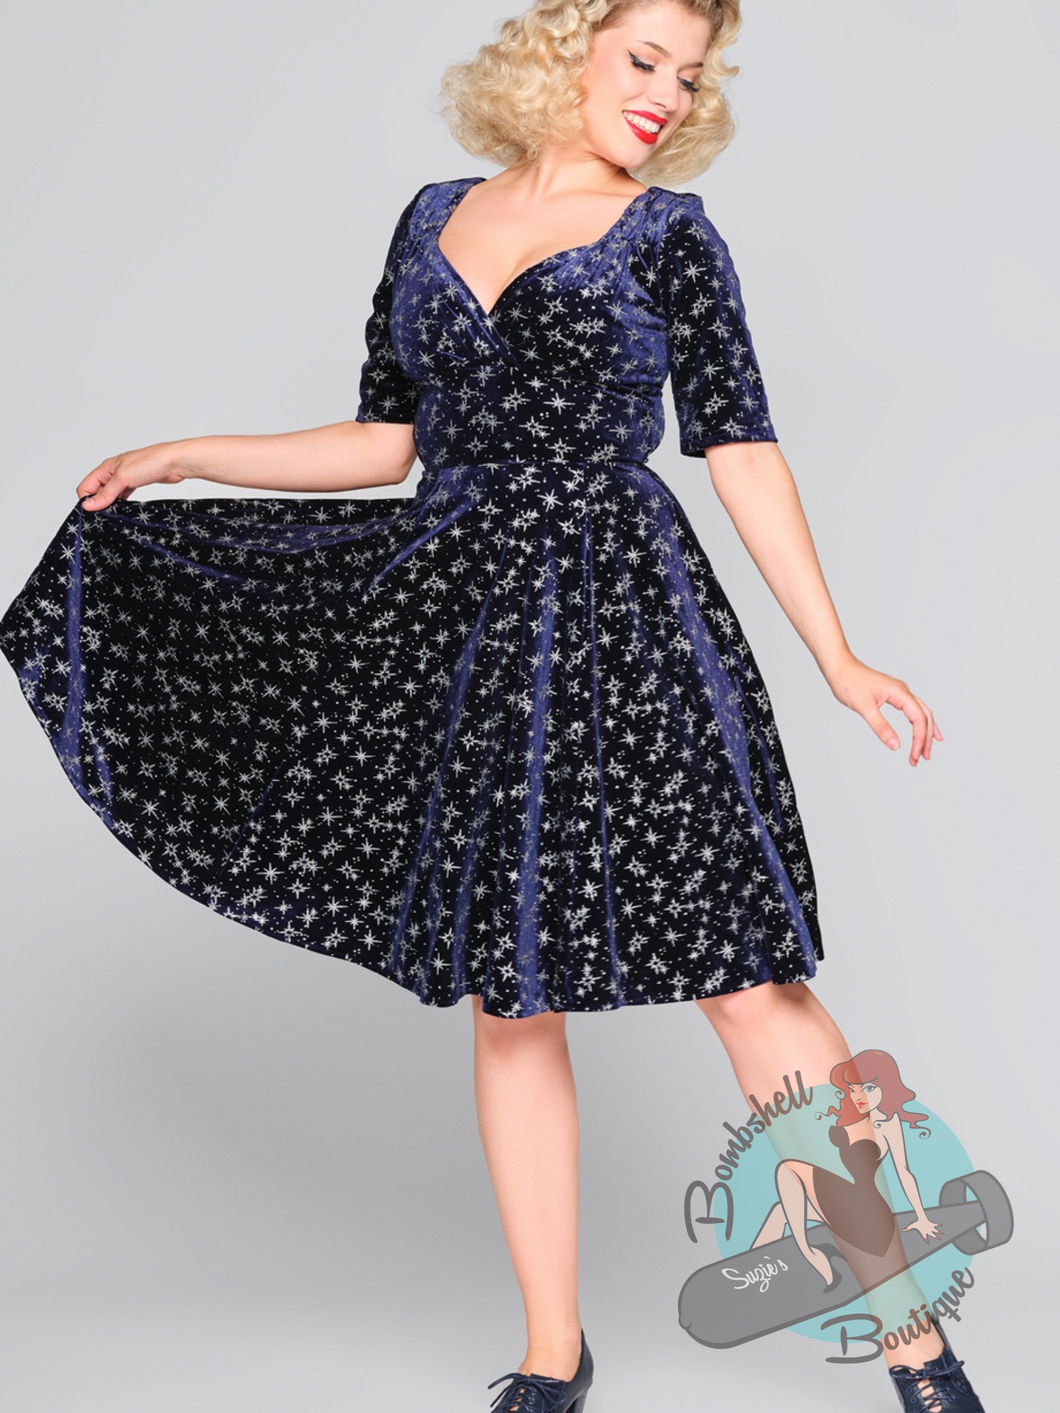 Blue velvet holiday swing dress with silver sparkle design. A perfect pin up Christmas party dress.